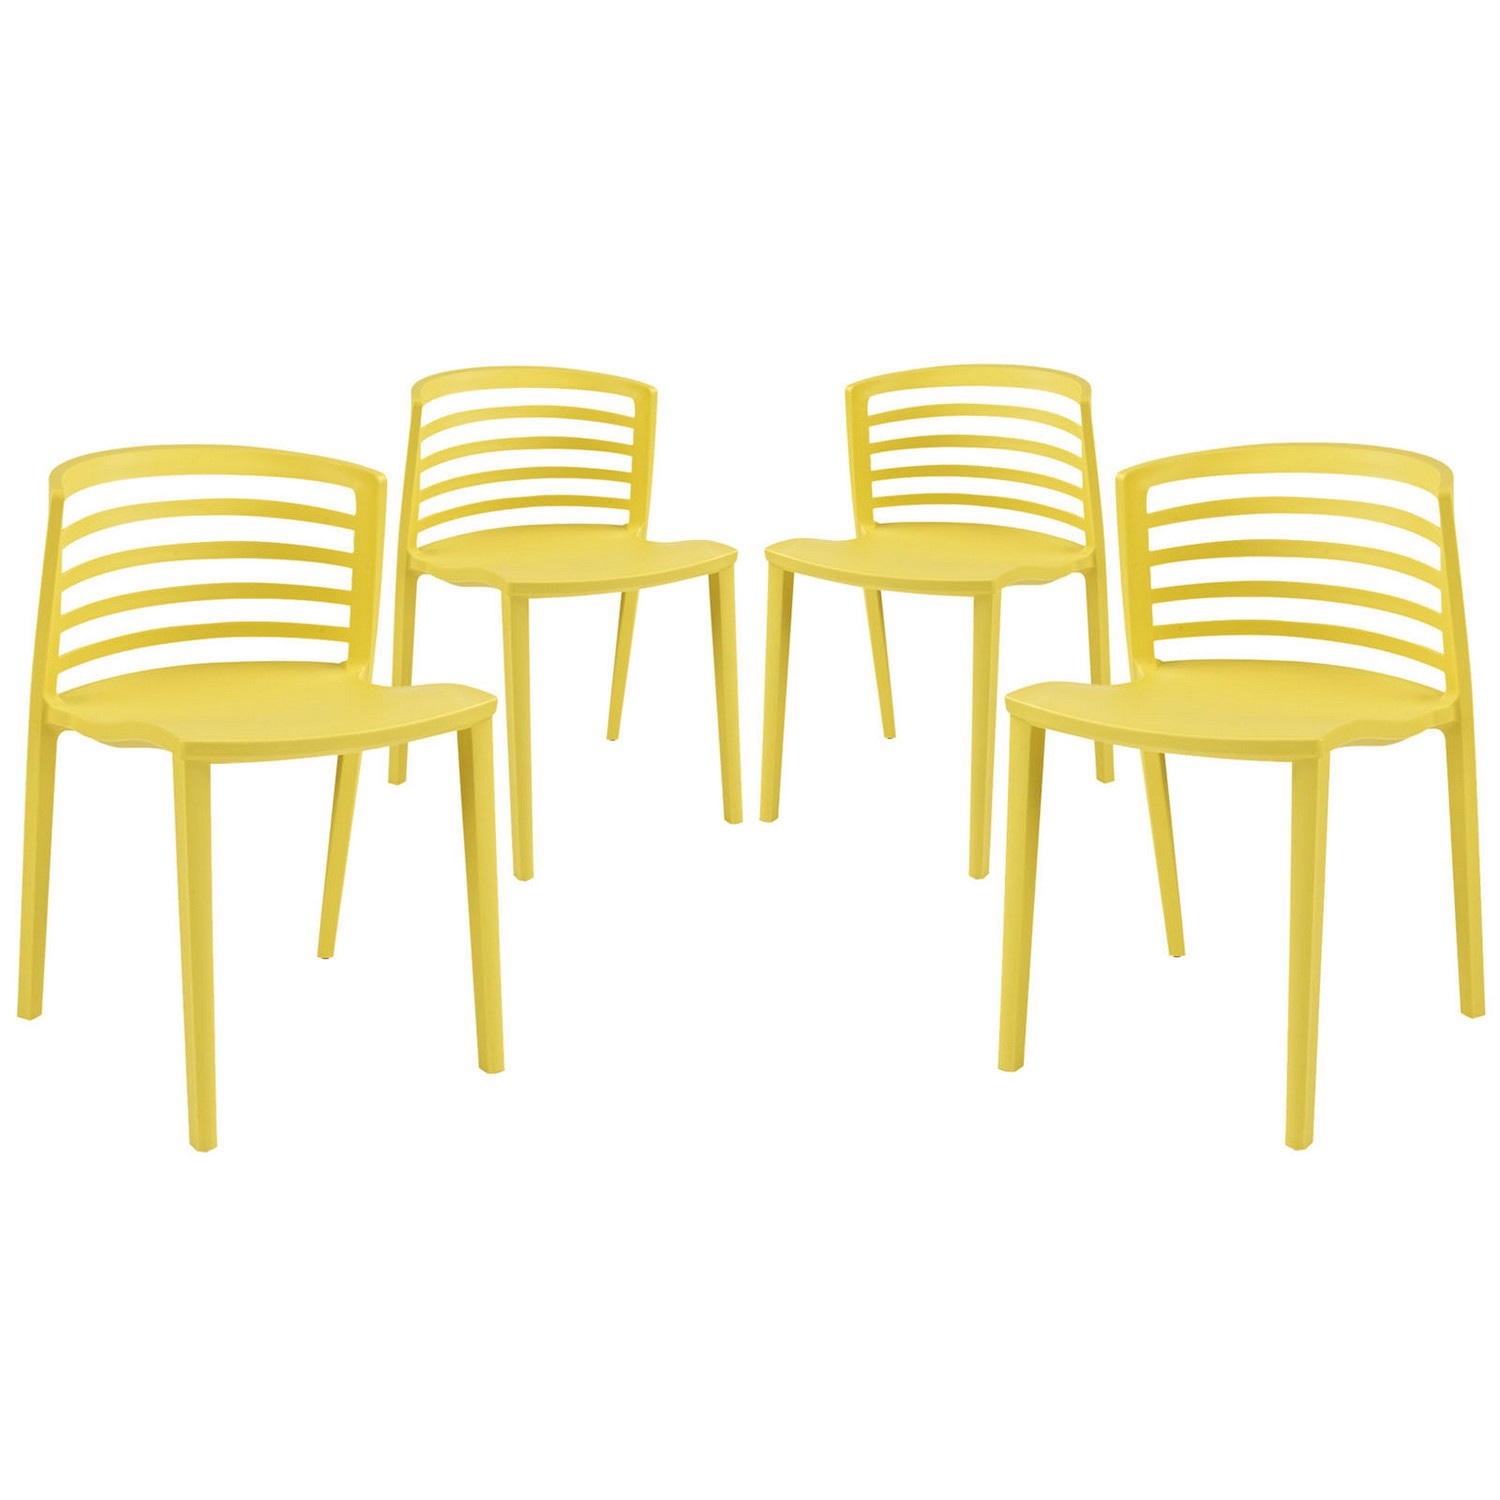 Modway Curvy 4PC Dining Chairs Set - Yellow